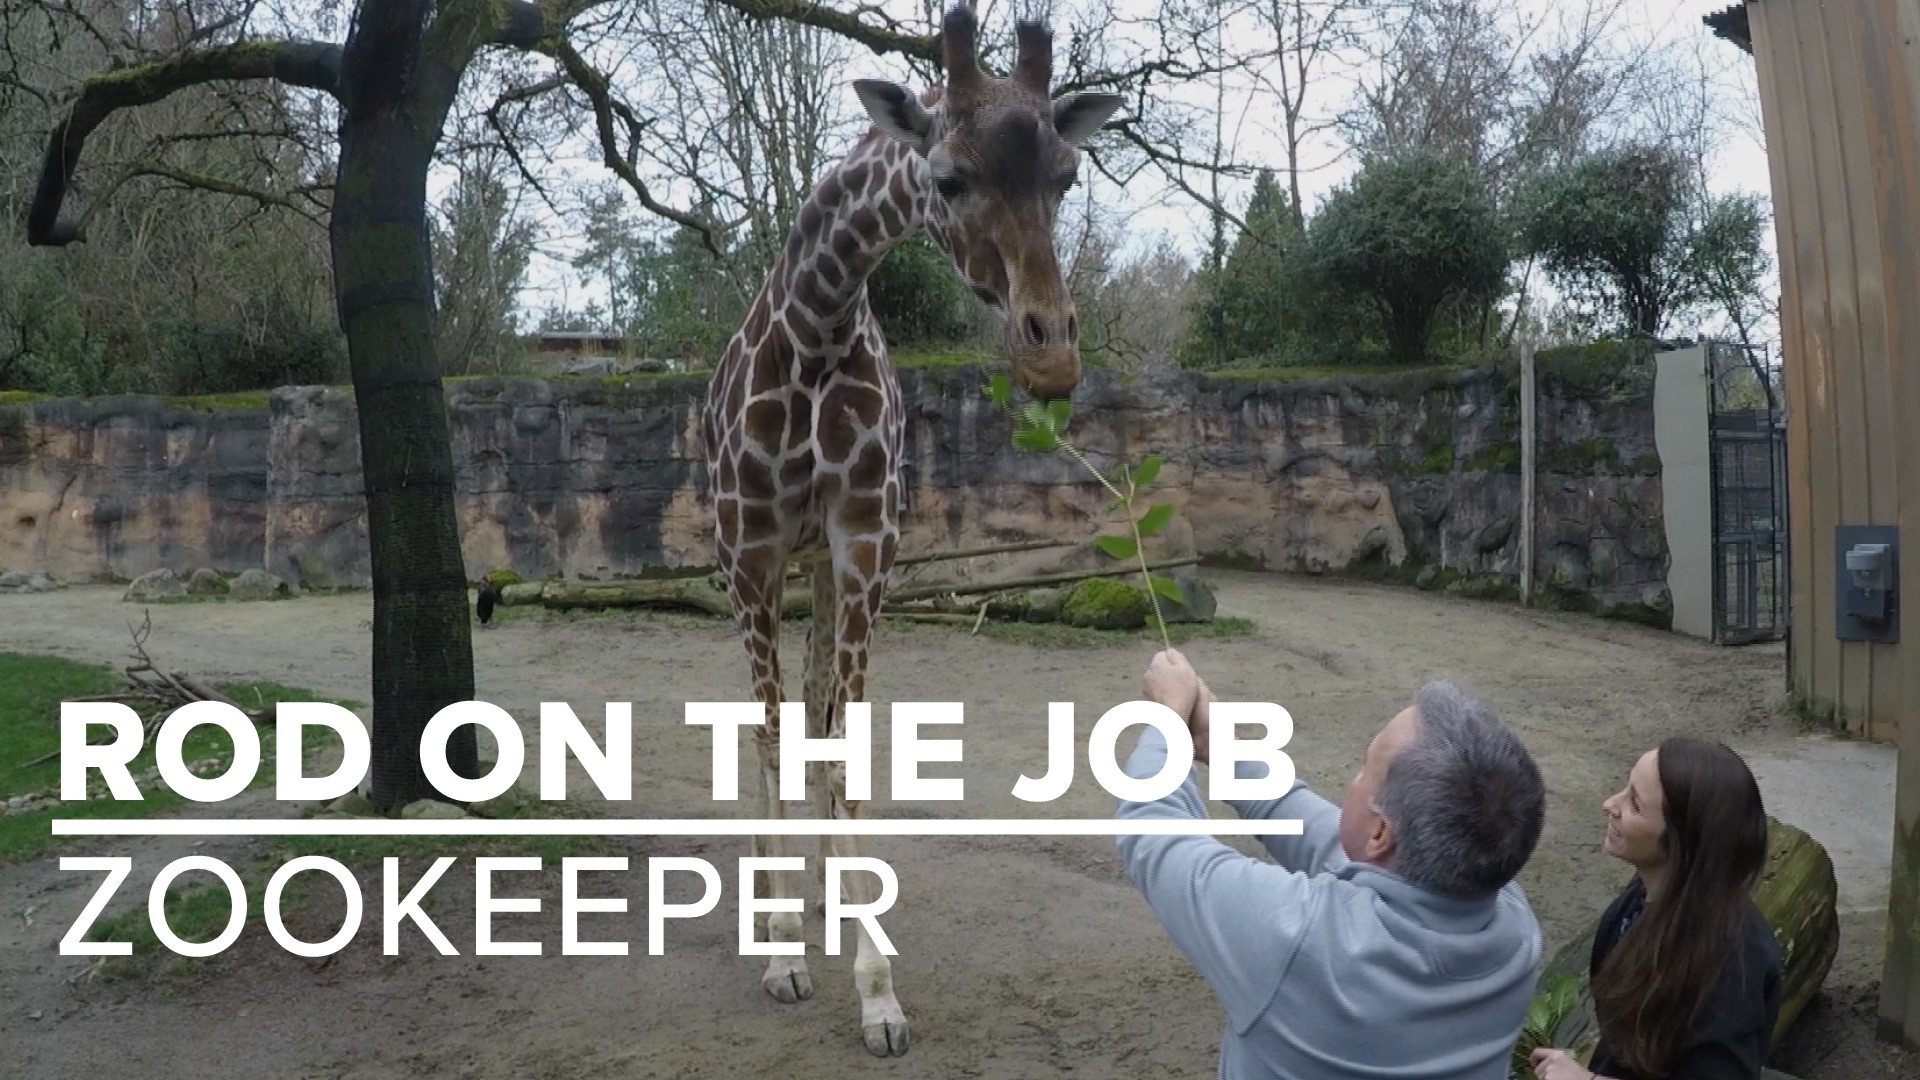 What does it take to be a zookeeper? Rod Hill visited the Oregon Zoo to find out.